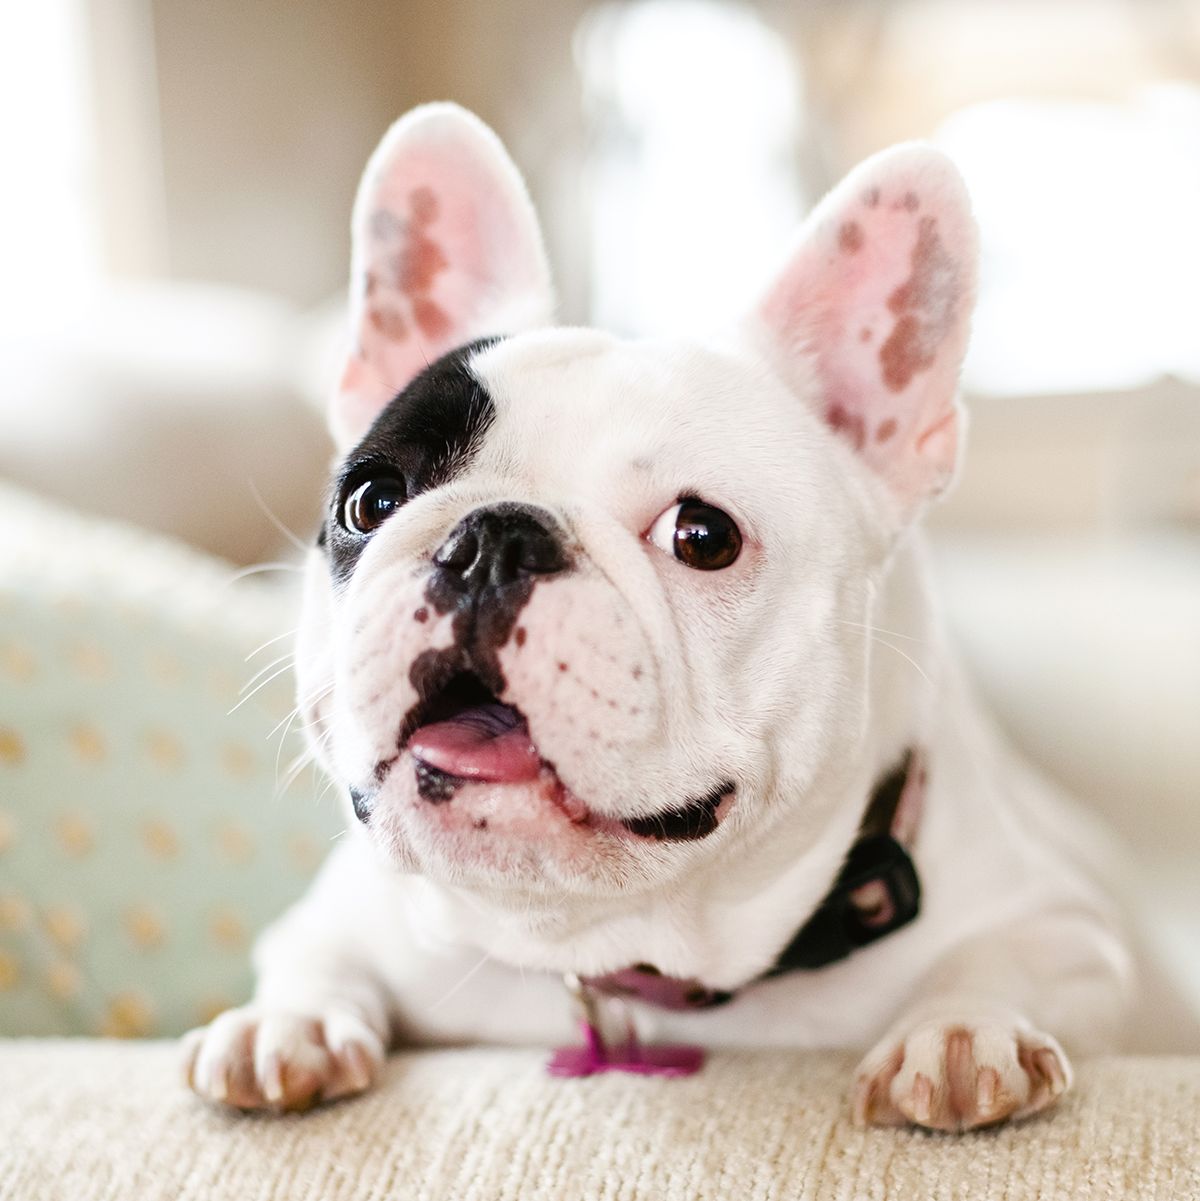 Loulou the French Bulldog smiles for a pet portrait on the couch.